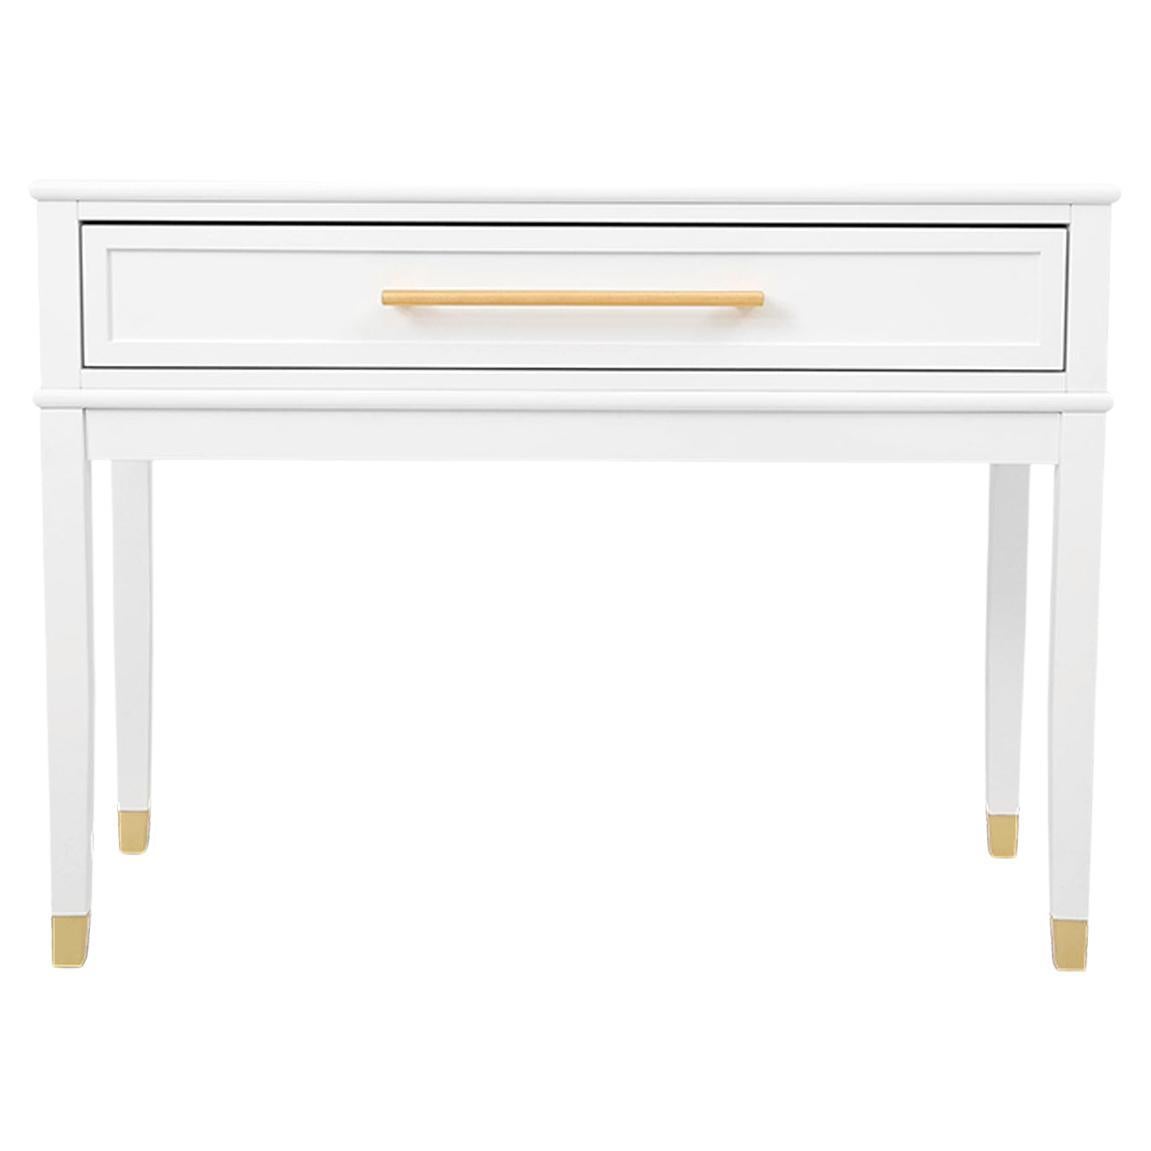 Elegant Modern Classic White Wooden Dresser Console with Brass Accents